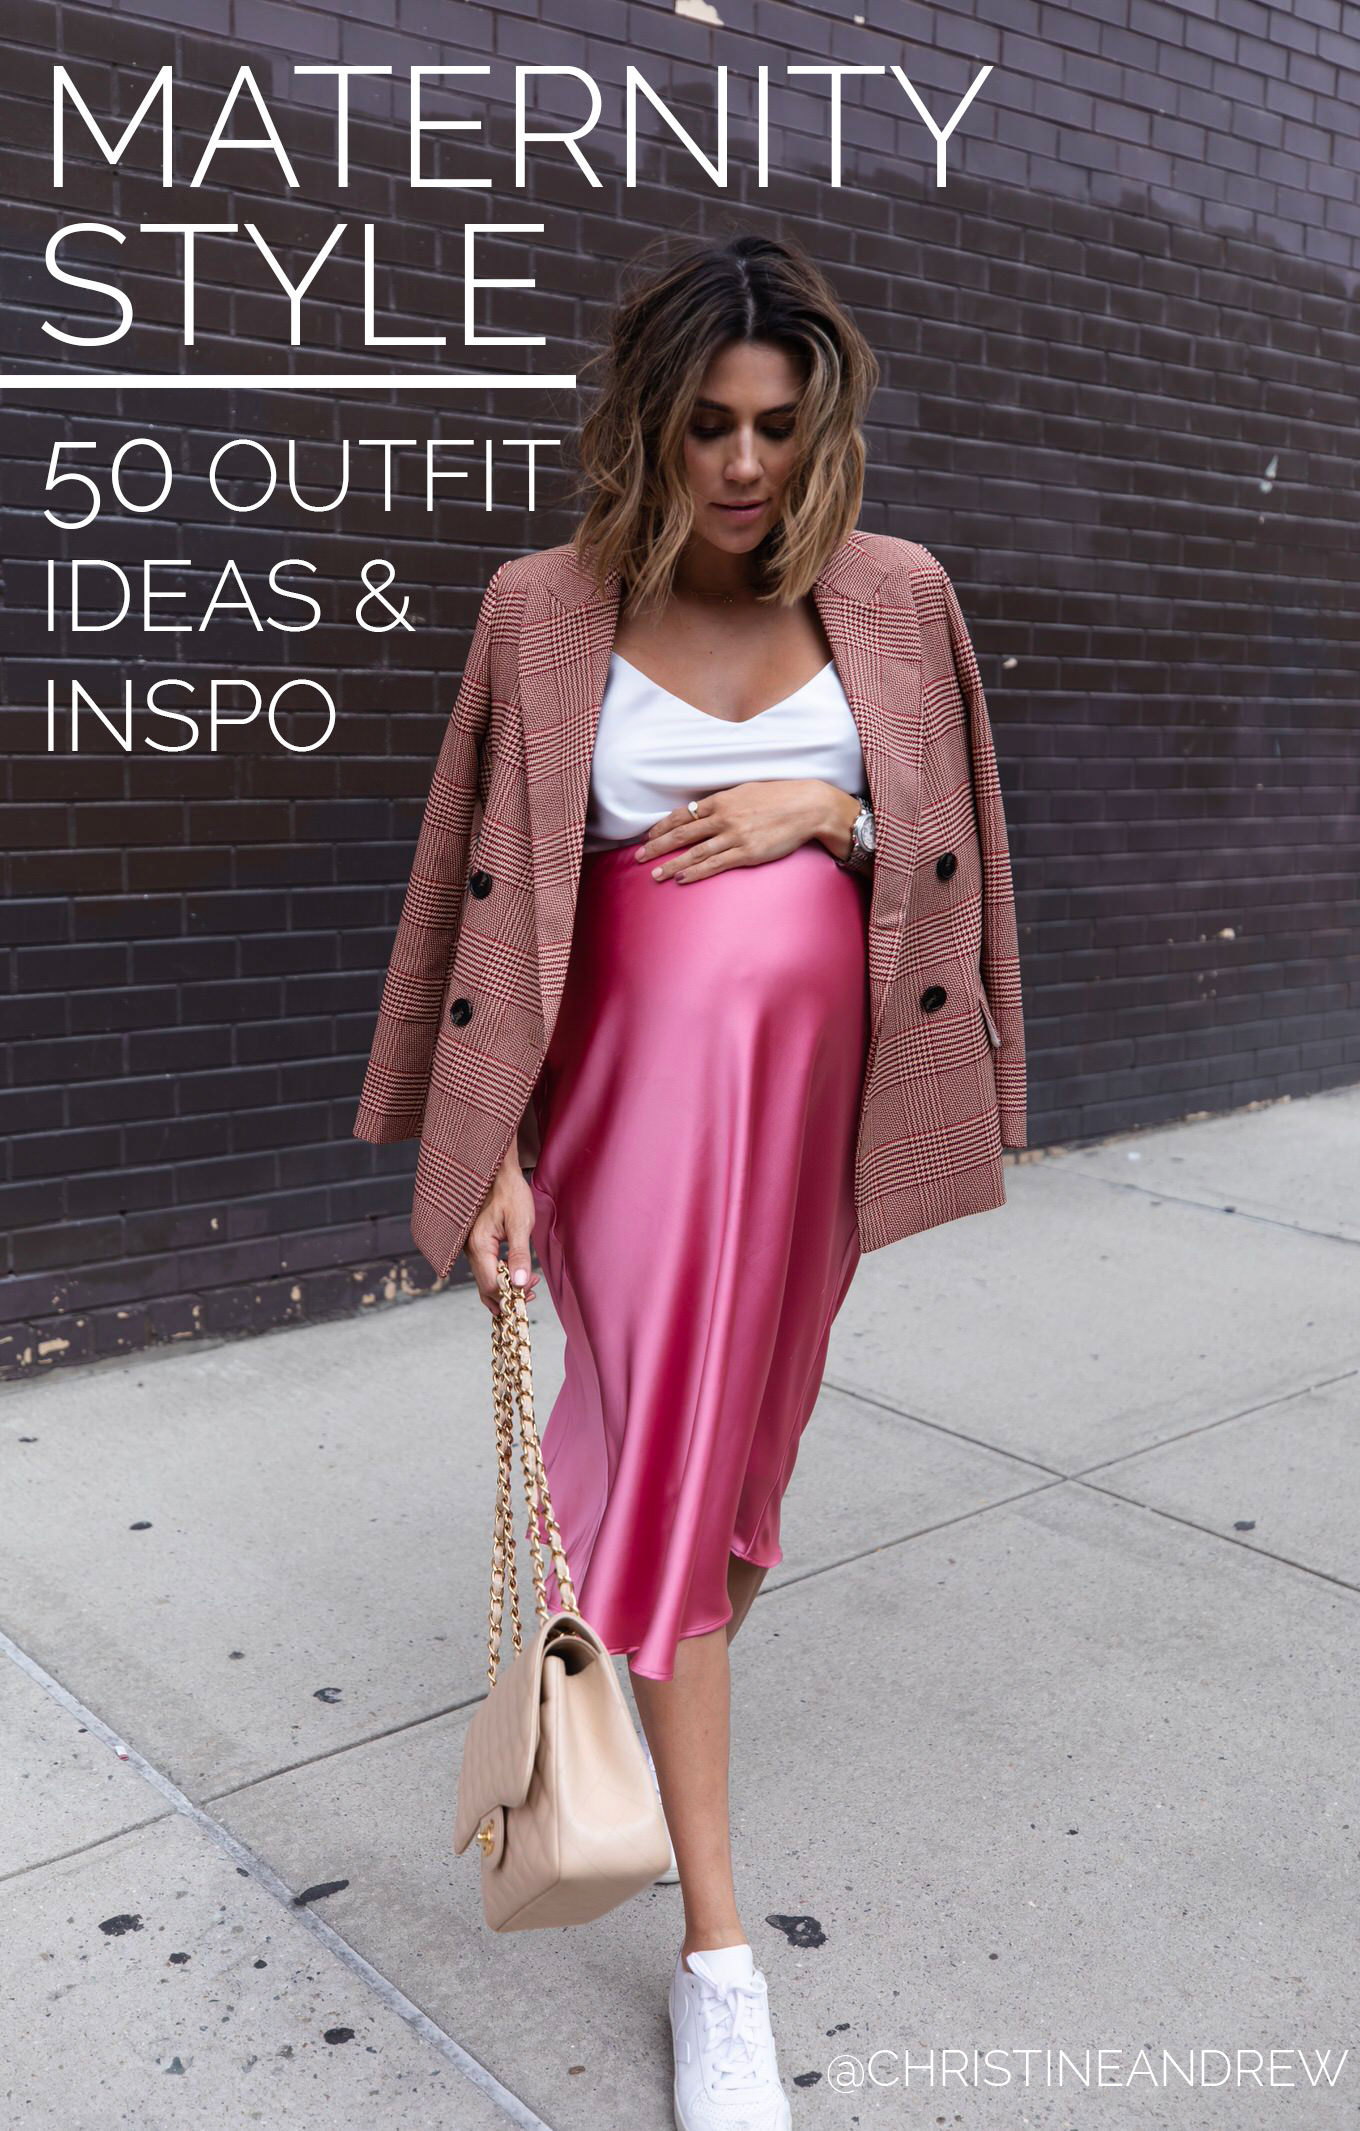 50 Maternity Outfits At All Price Points